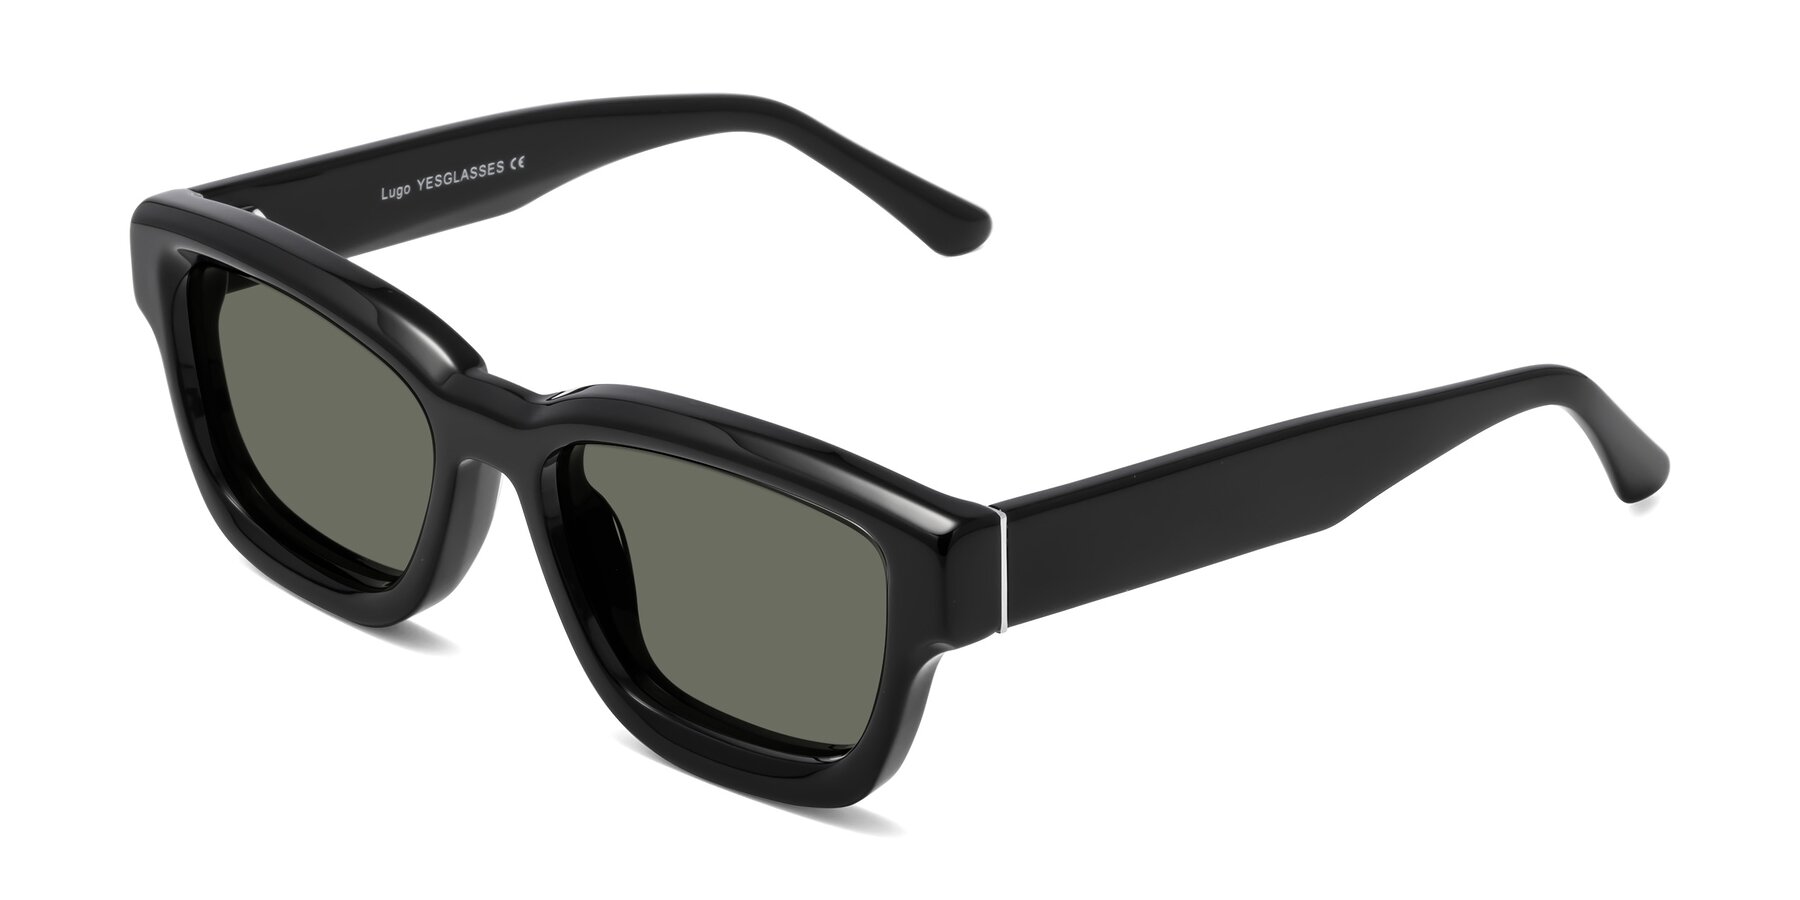 Angle of Lugo in Black with Gray Polarized Lenses